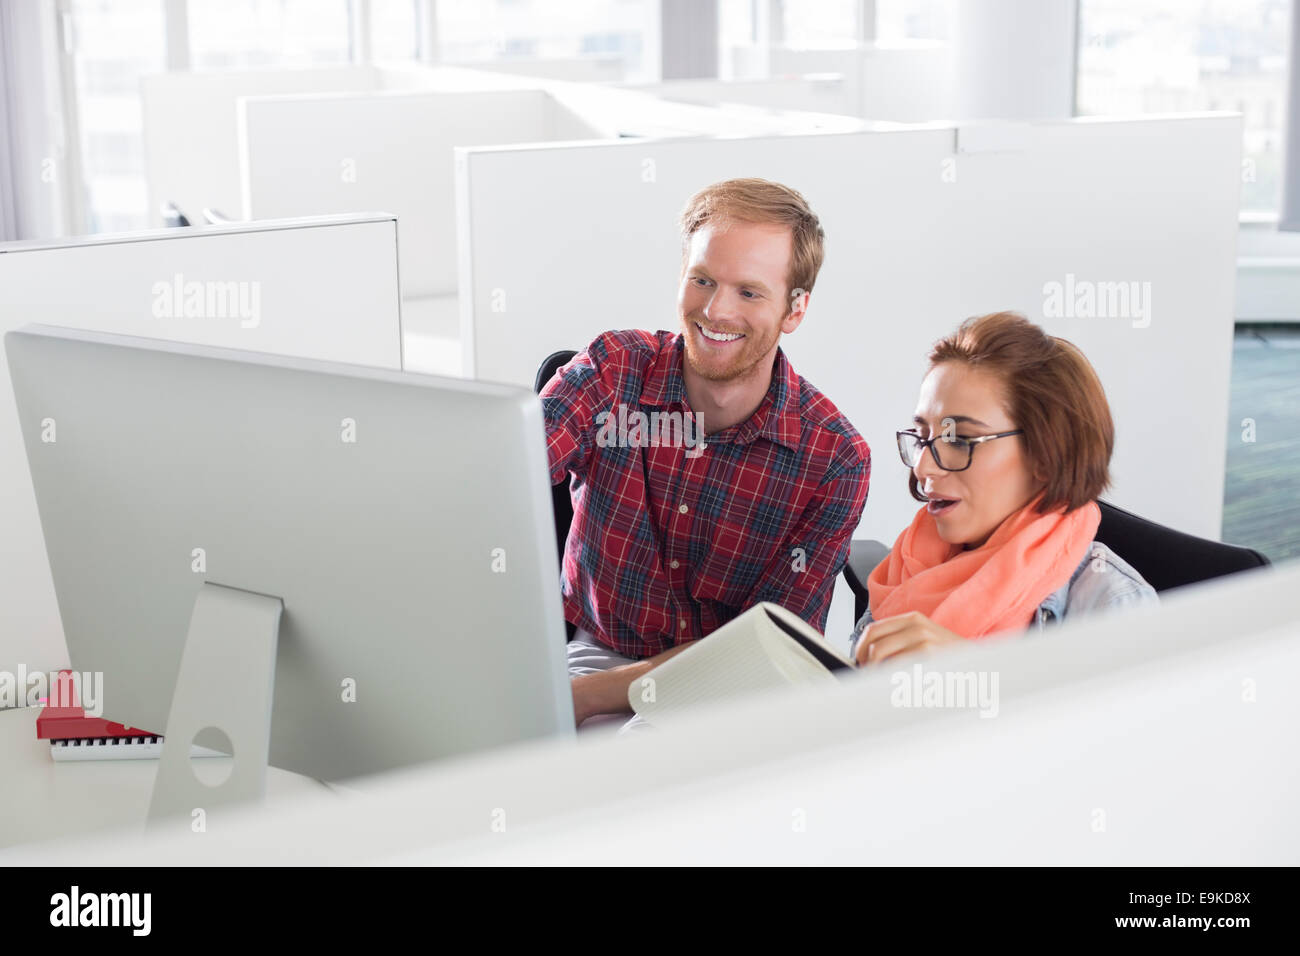 Businessman and businesswoman using computer in creative office Banque D'Images